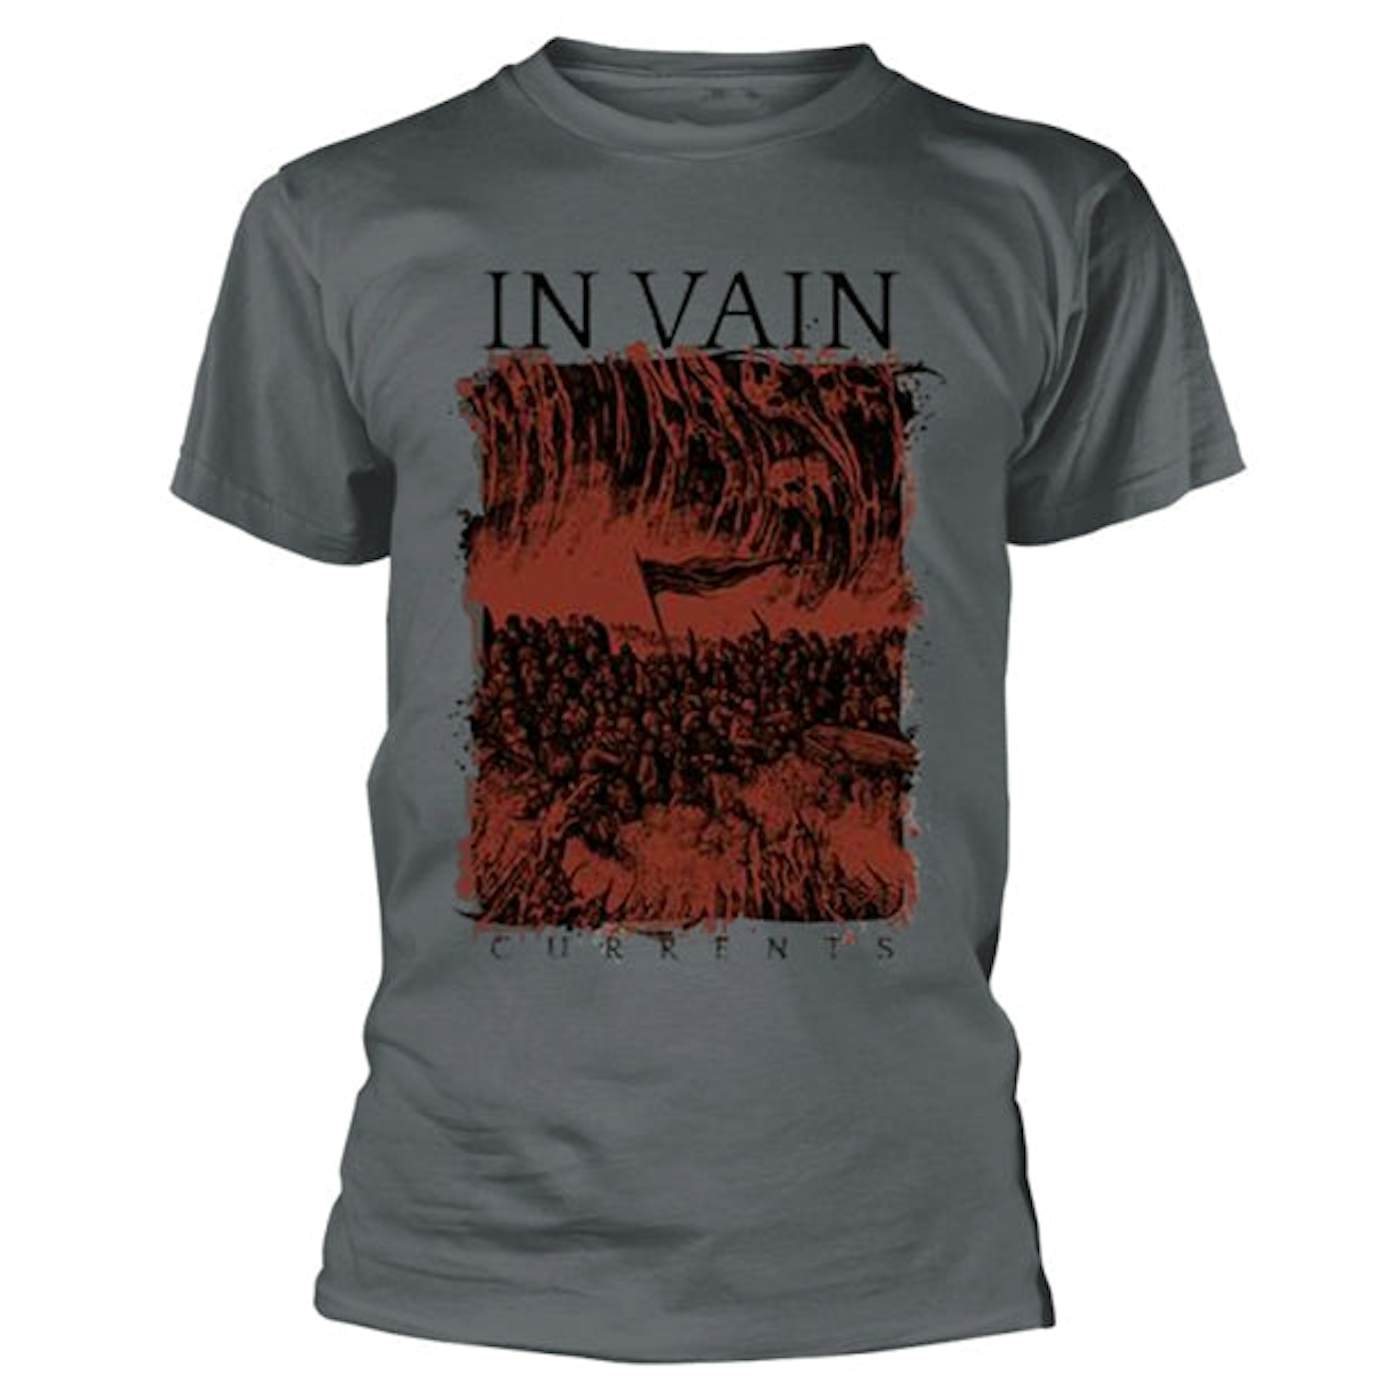 In Vain T Shirt - Currents